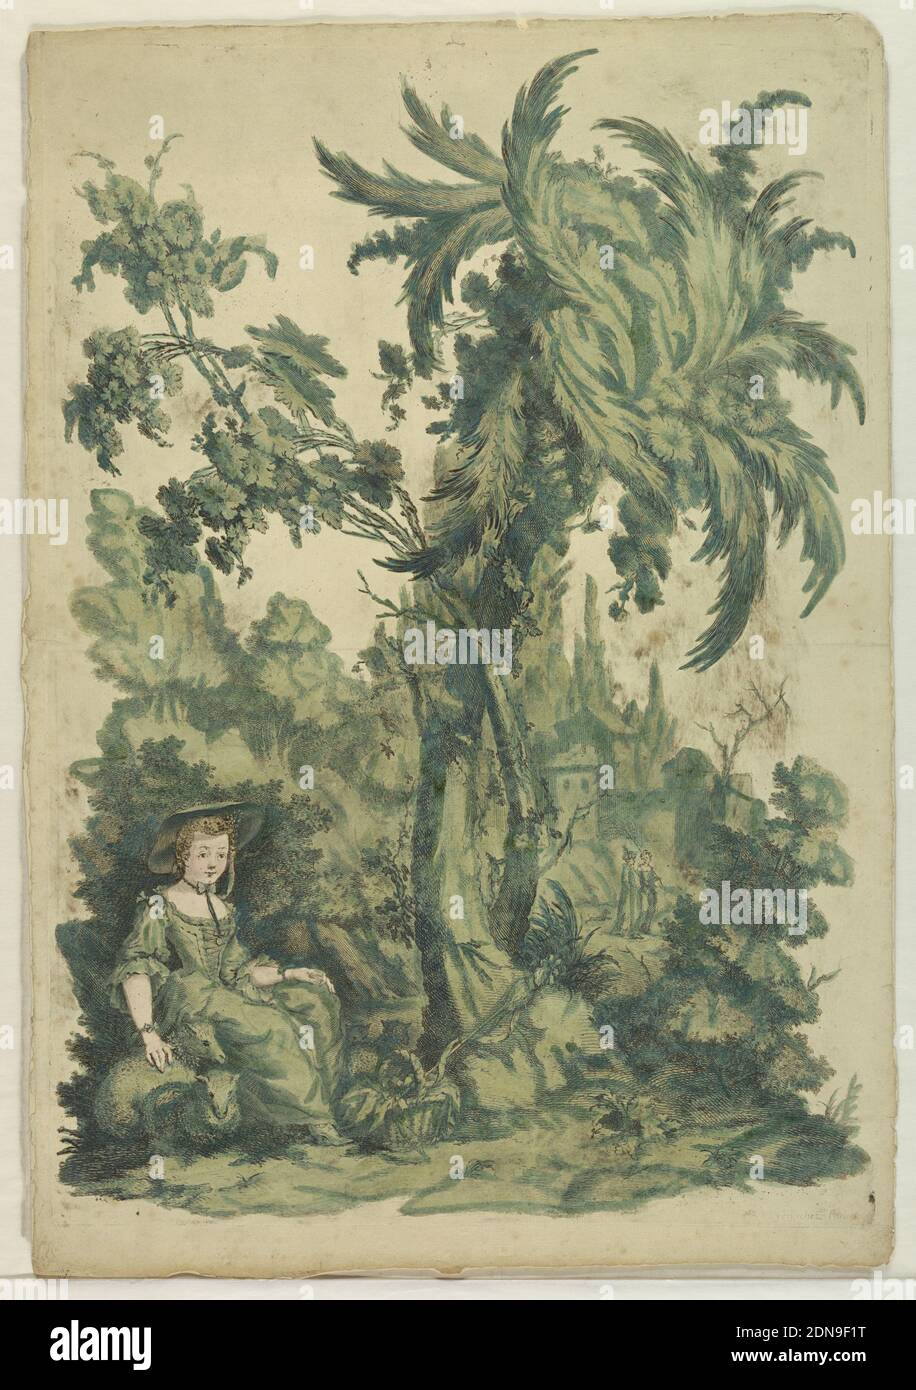 Esther before Ahasverus, Brush and watercolor on paper, mounted, Ahasverus rises from his throne at left to extend his scepter to Estcherm who is fainting and supported by women. A guard with a spear and an old man are by the throne. Trees at right and left. Bottom: 'Estcher devant Assverus' 'à Paris chés Charpentier rue St. Jacques au Coq. Avec privilège du Roy'., France, 1750–1775, Print Stock Photo